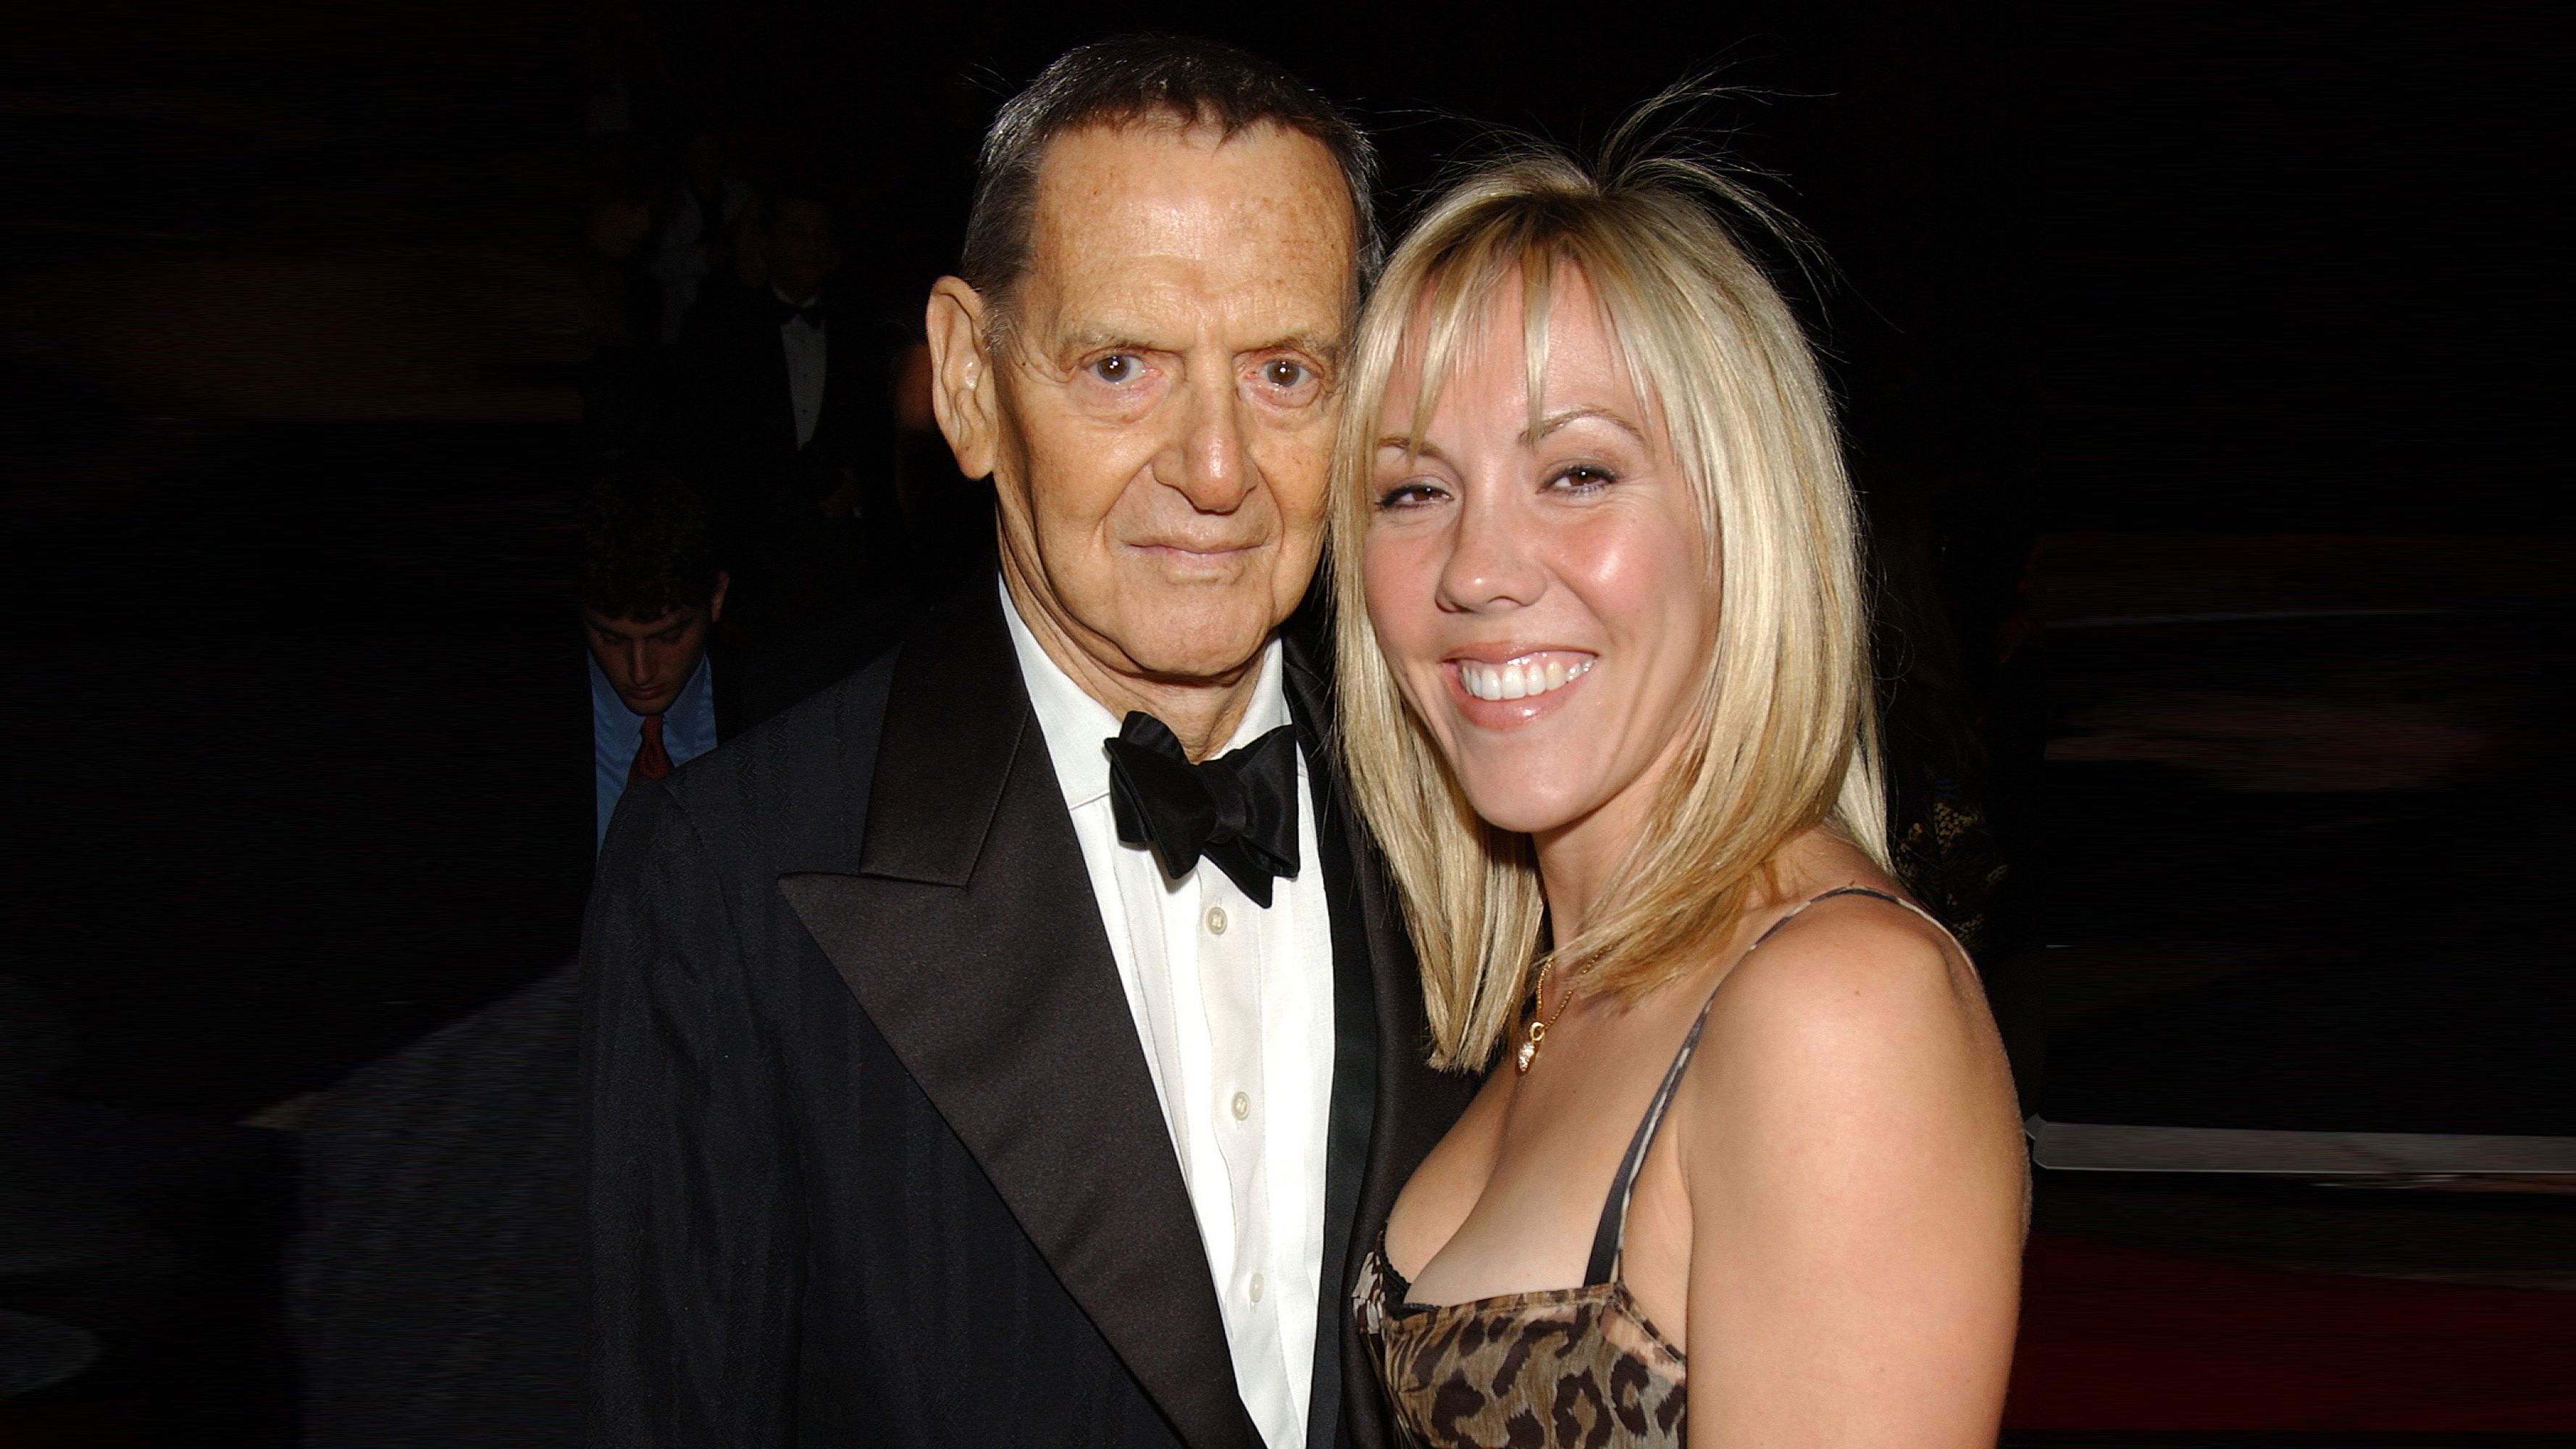 Heather Randall, Wife of Tony Randall The Marie Claire Interview Marie Claire image image